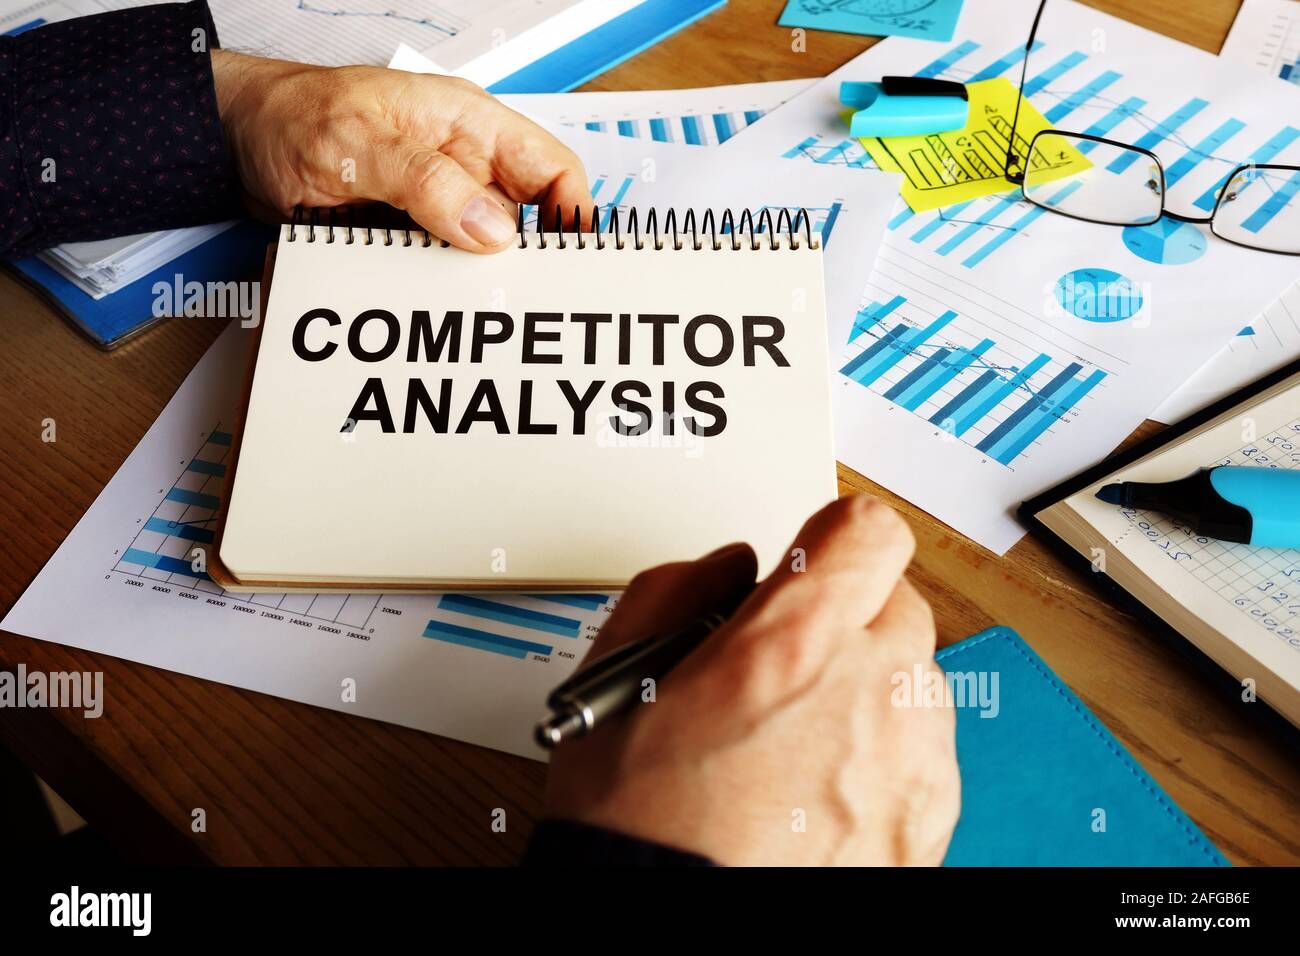 Competitor analysis report in the man hands. Stock Photo